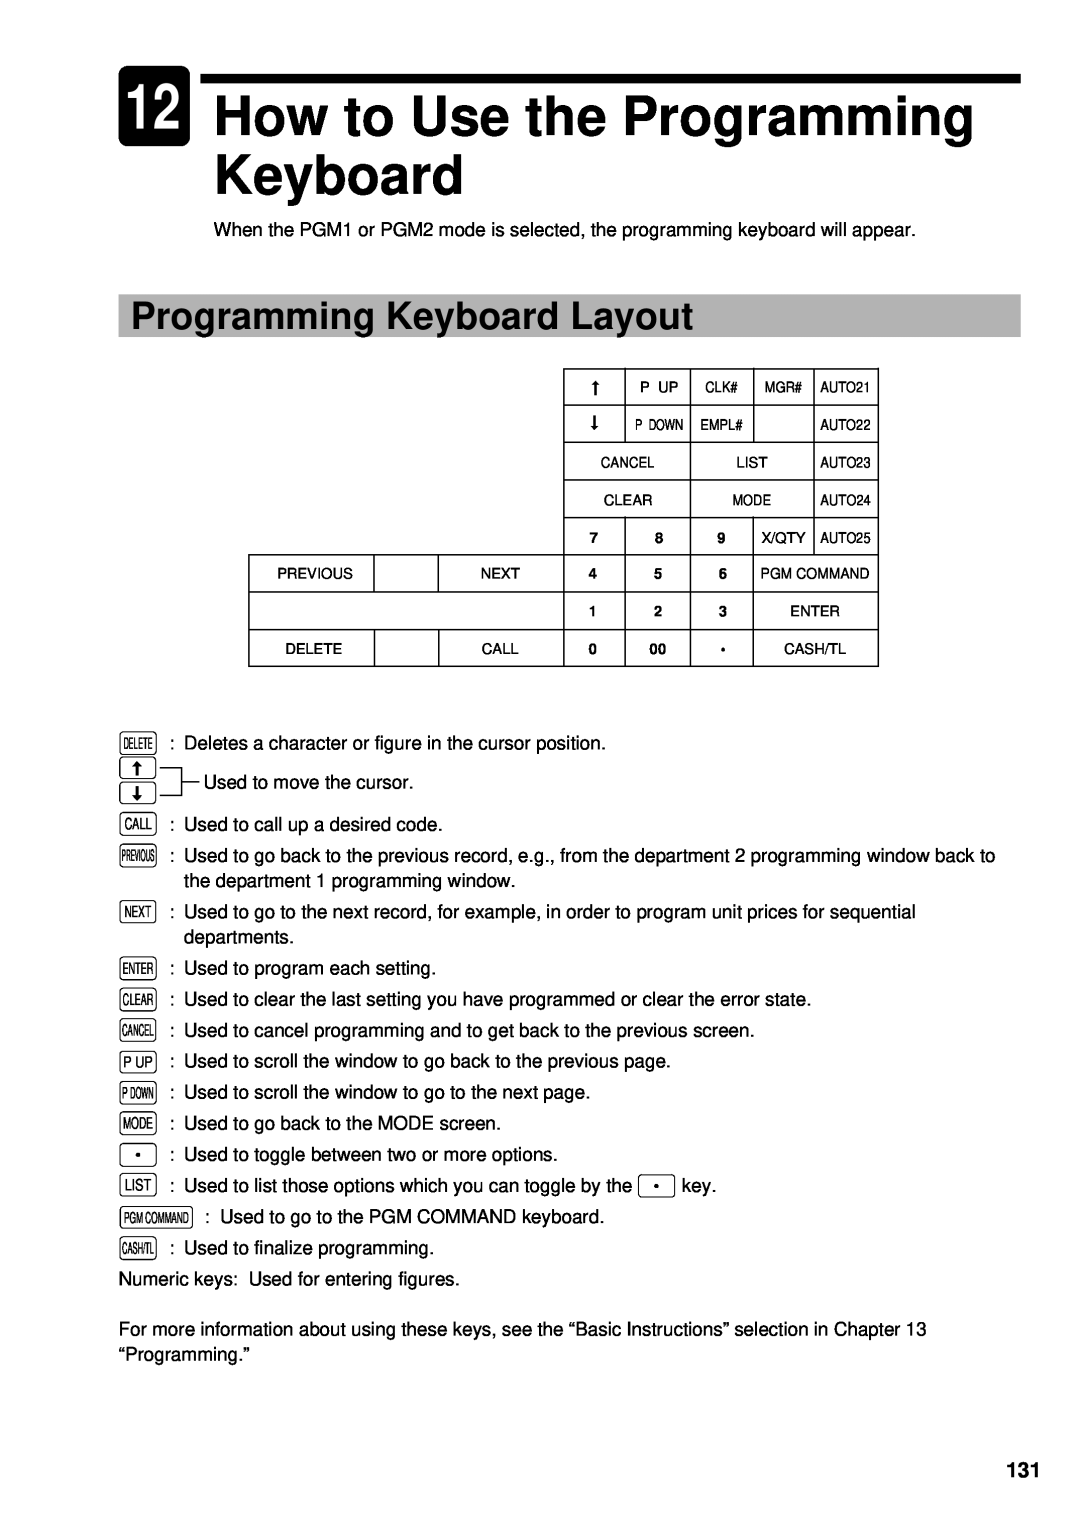 Sharp UP-3300 instruction manual 12How to Use the Programming Keyboard, Programming Keyboard Layout 